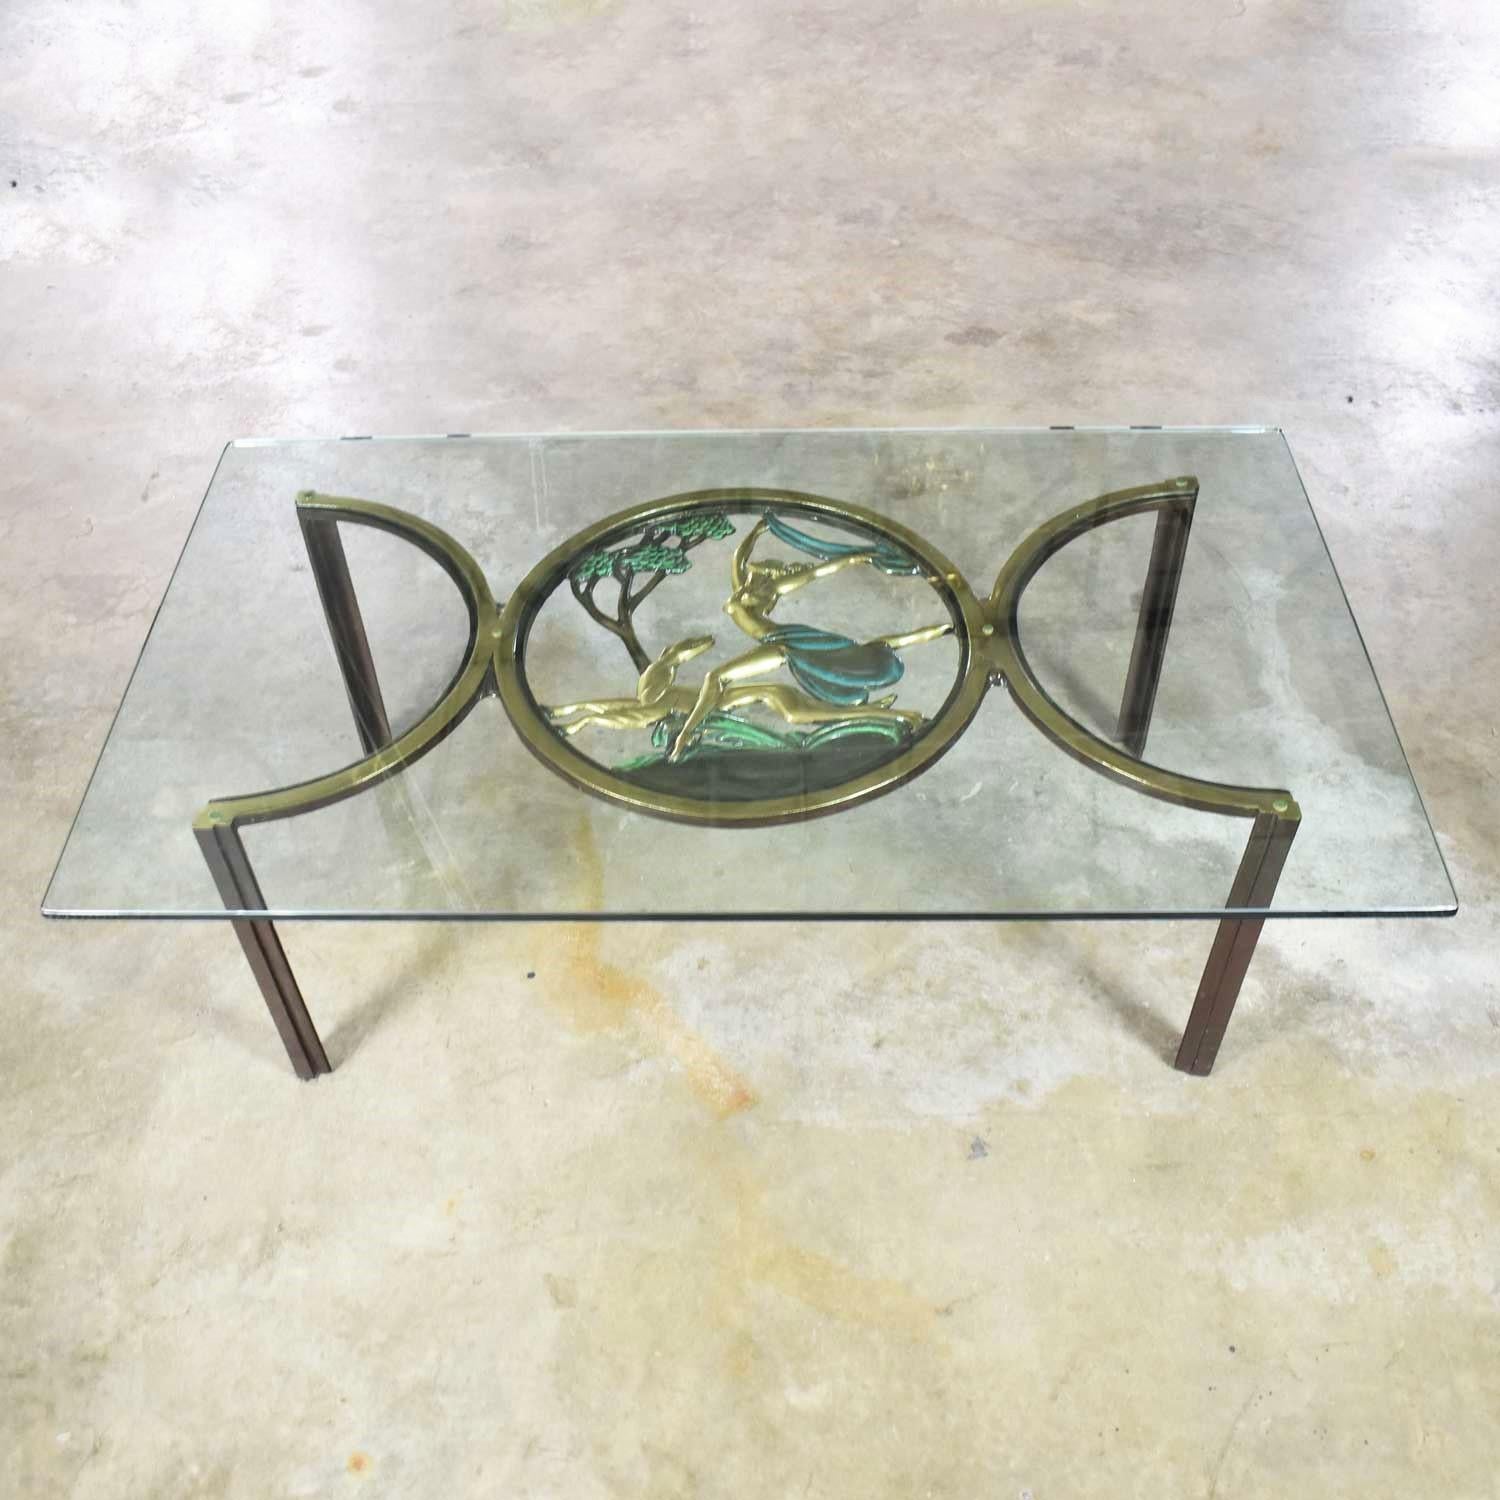 American Art Deco Style Bronze Coffee Table with Diana the Huntress Medallion & Glass Top